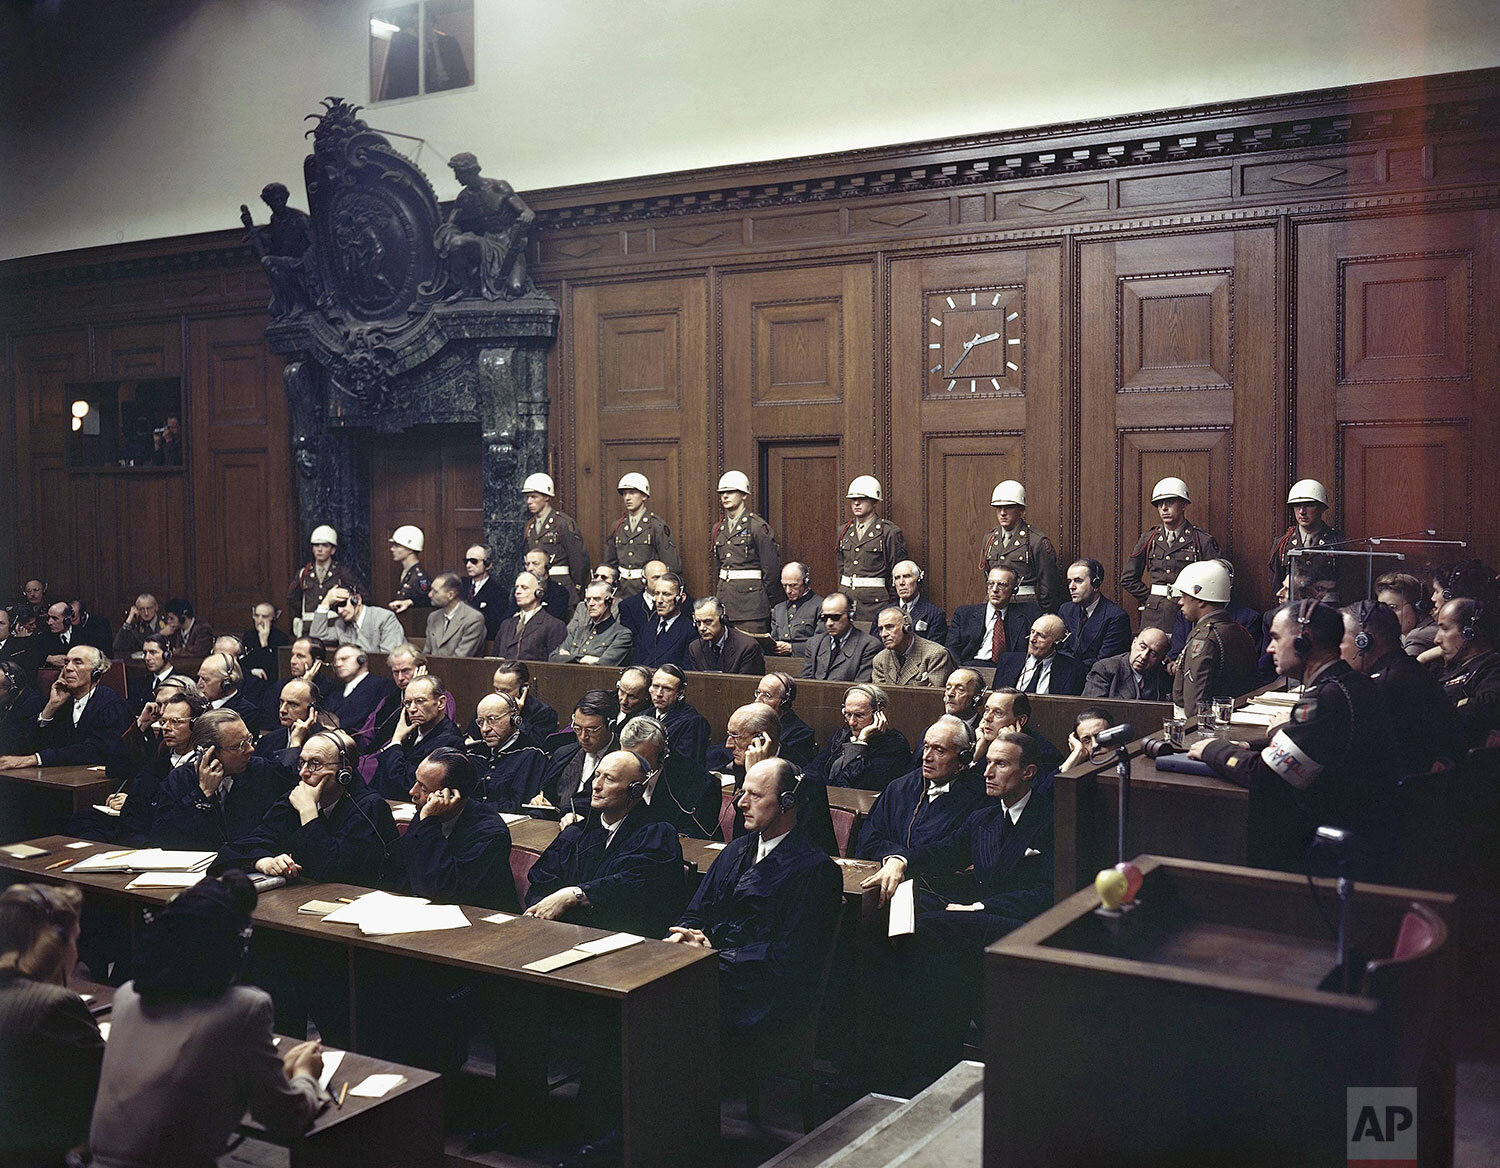  Defendants listen to part of the verdict in the Palace of Justice during the Nuremberg War Crimes Trial in Nuremberg, Germany on Sept. 30, 1946. Seated in the first row in the prisoner's dock are, from left: Hermann Goering, wearing dark glasses; Ru